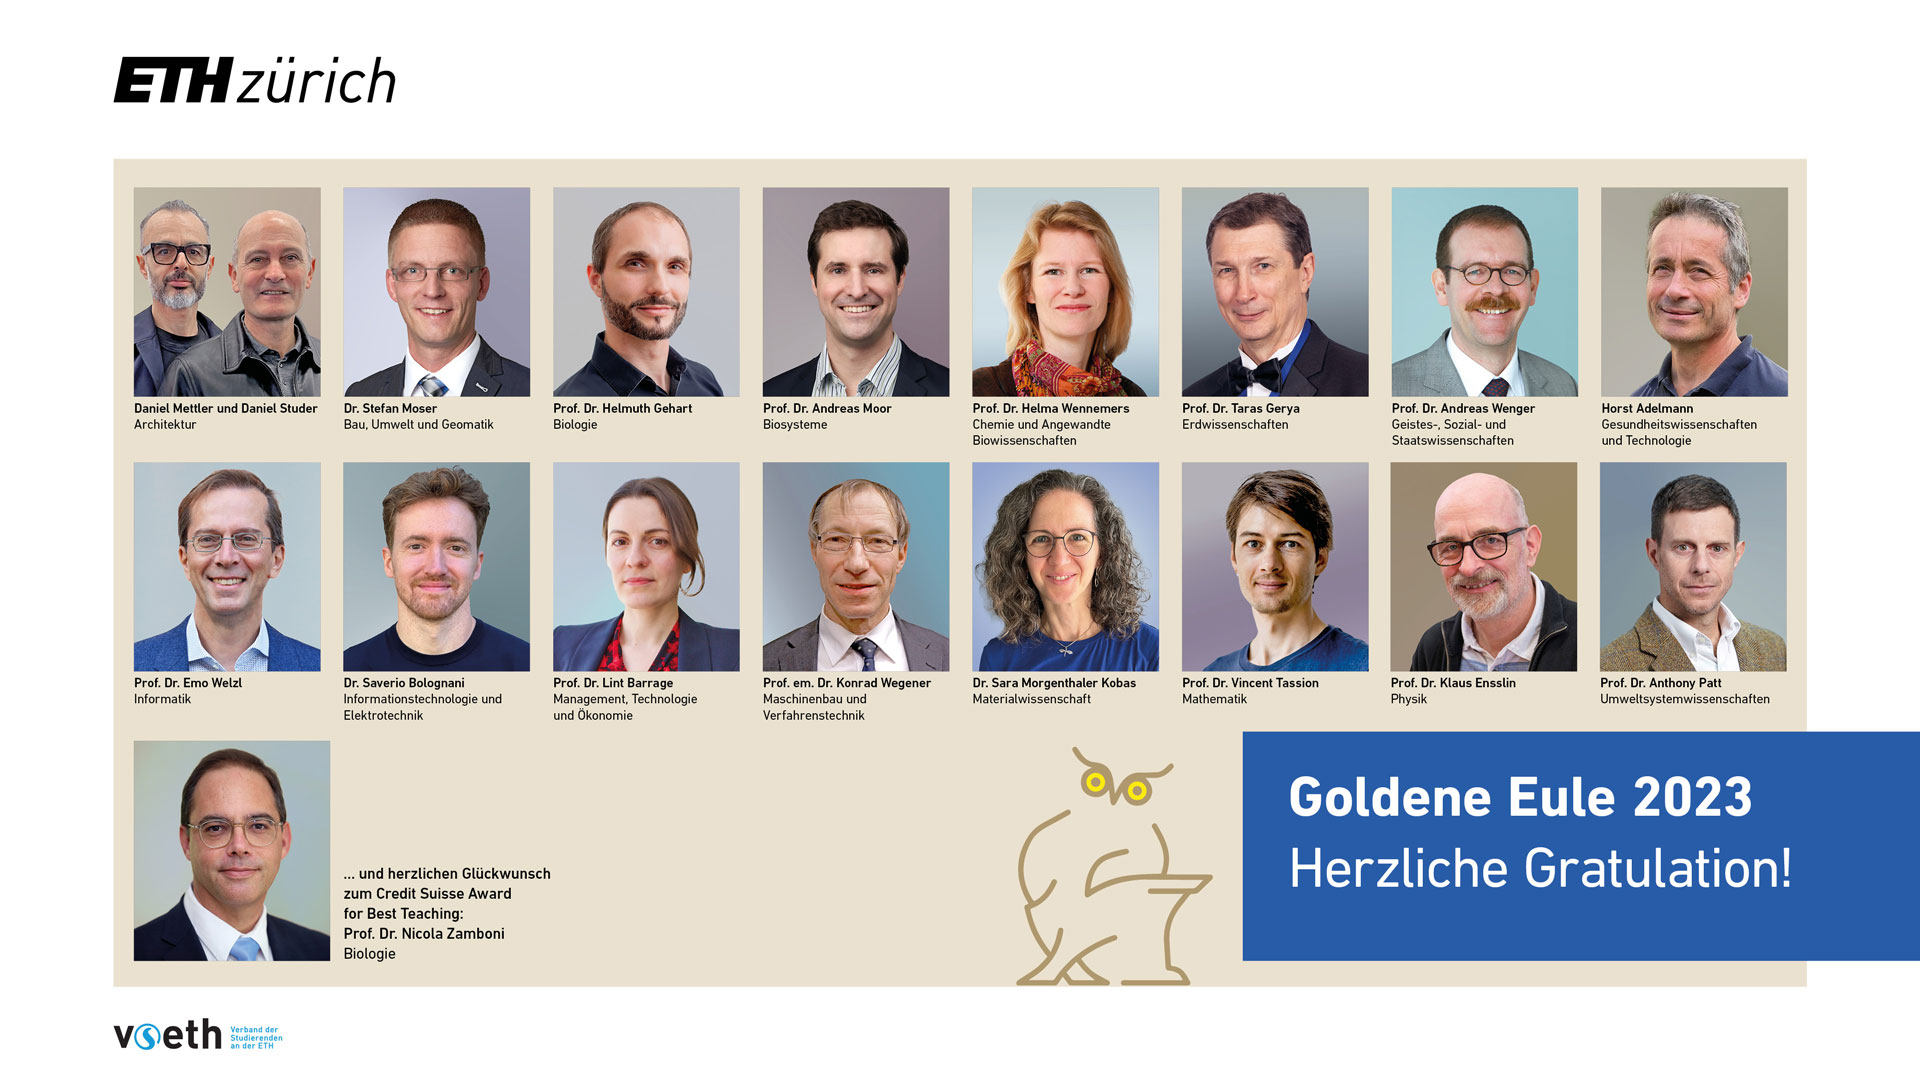 Enlarged view: Golden Owl Awardees in 2023